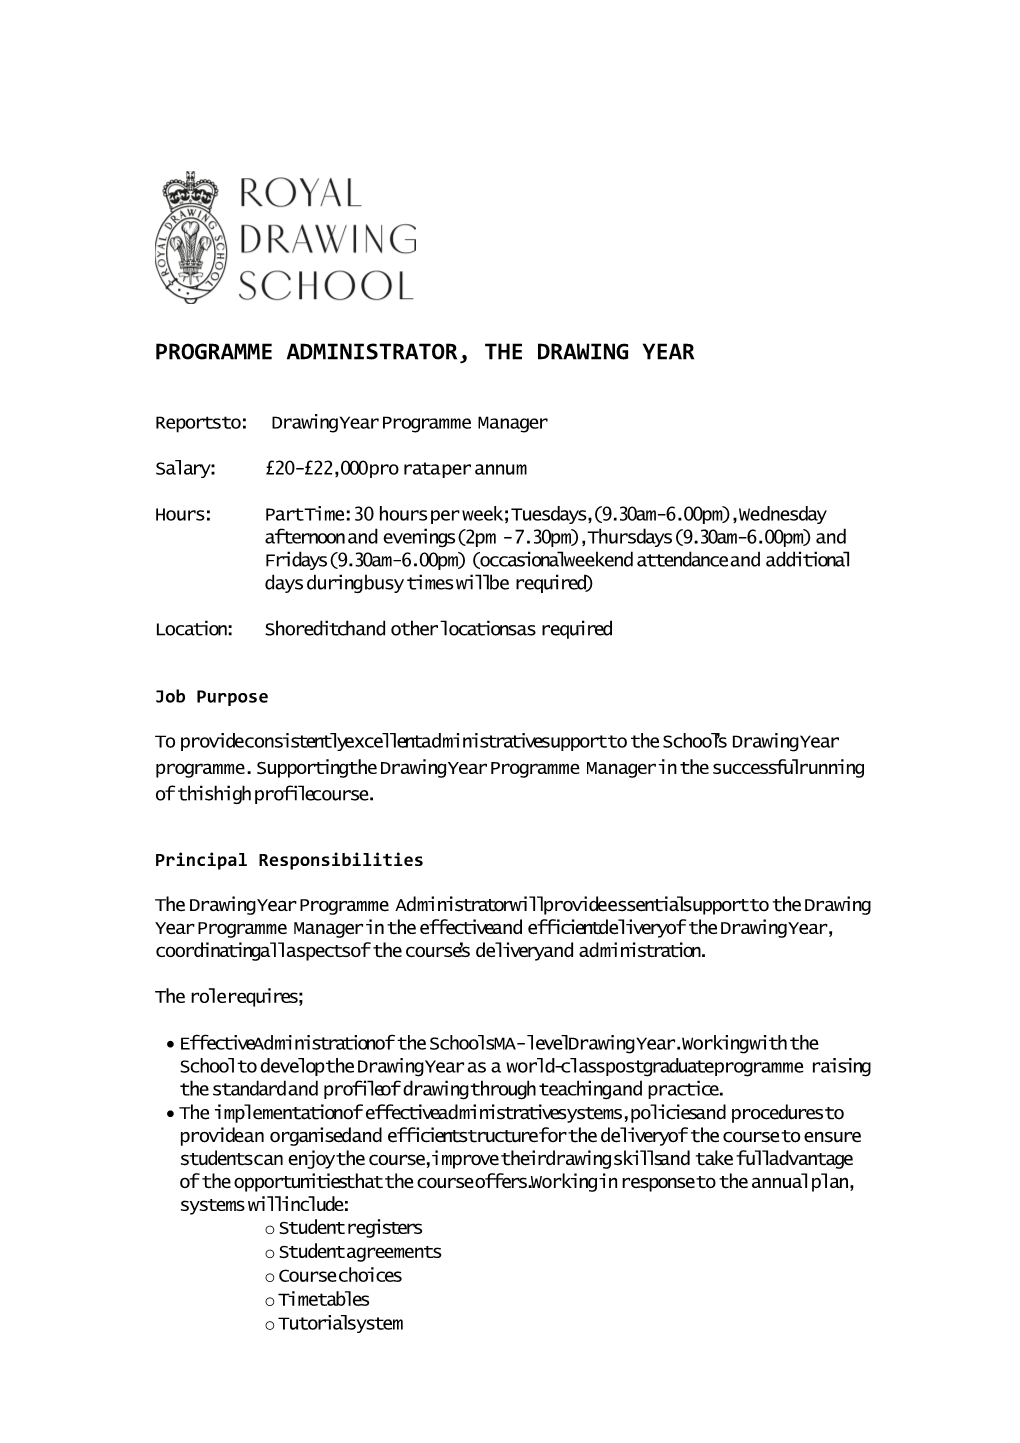 Programme Administrator, the Drawing Year